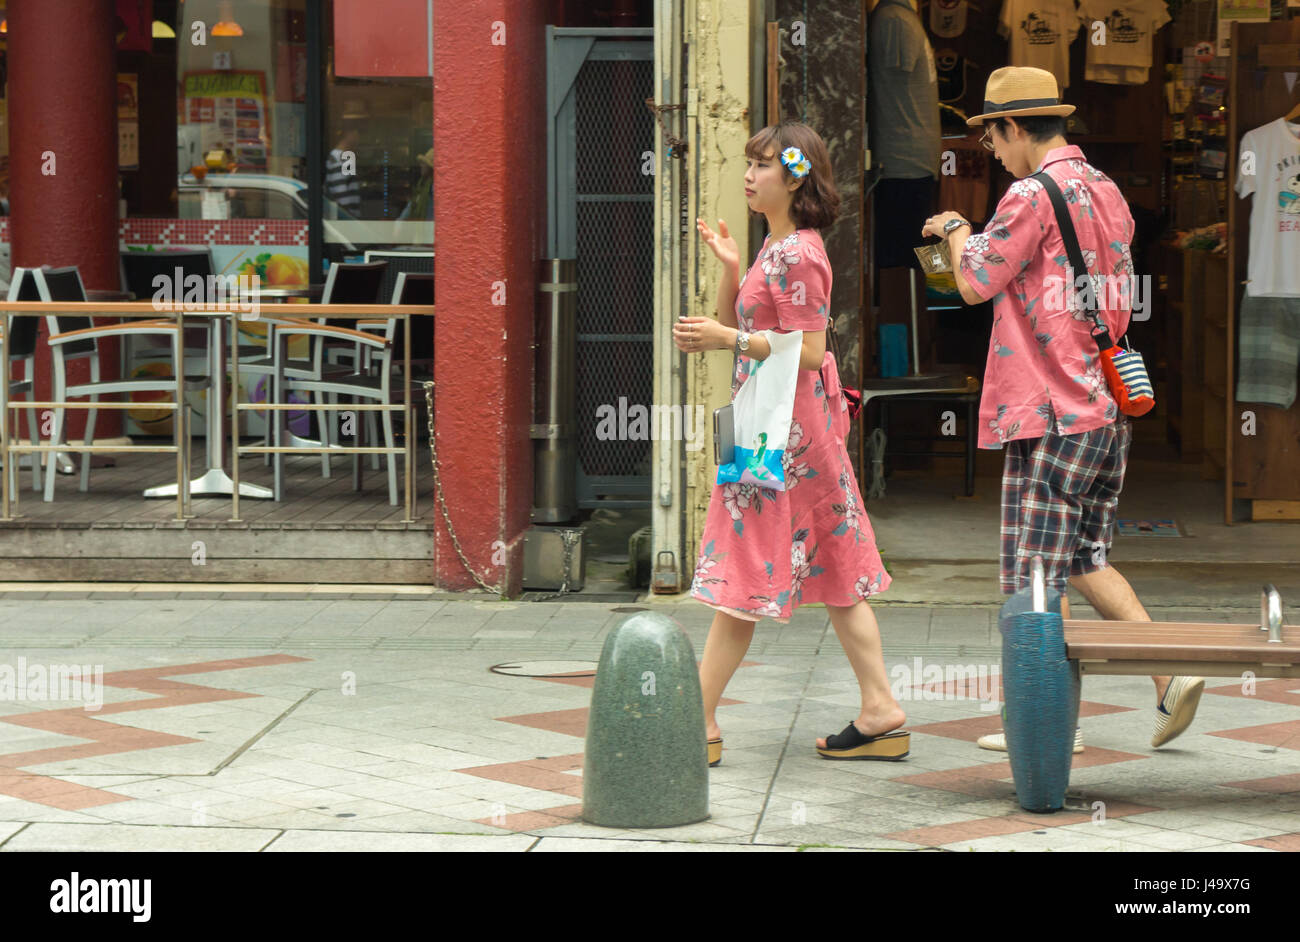 Okinawa, Japan - March 24th, 2017: A japanese couple wearing matching outfits walking on the sidewalk in Naha, Okinawa. Stock Photo